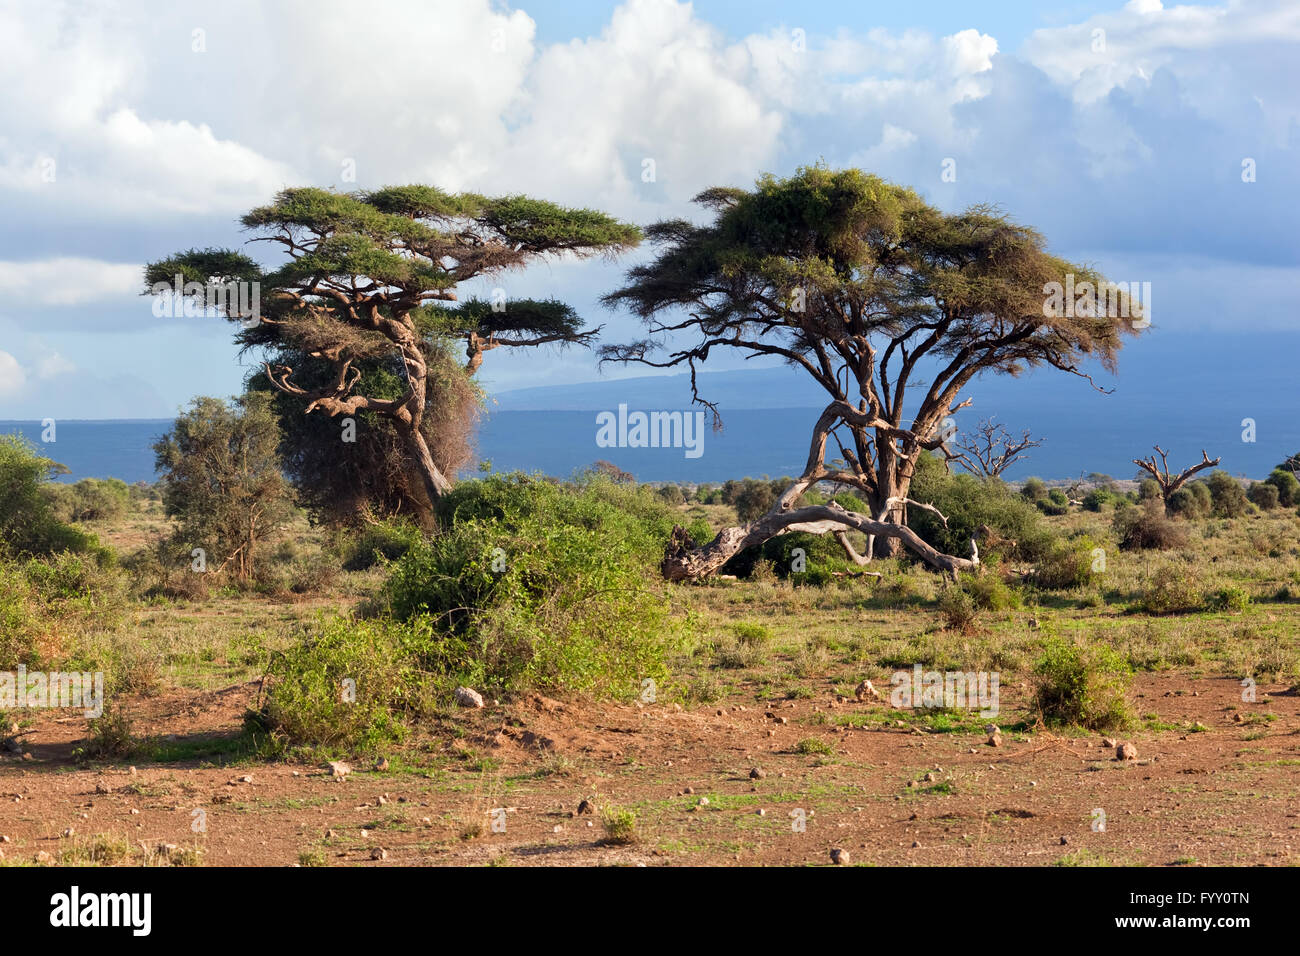 Savanna landscape and its flora in Africa Stock Photo